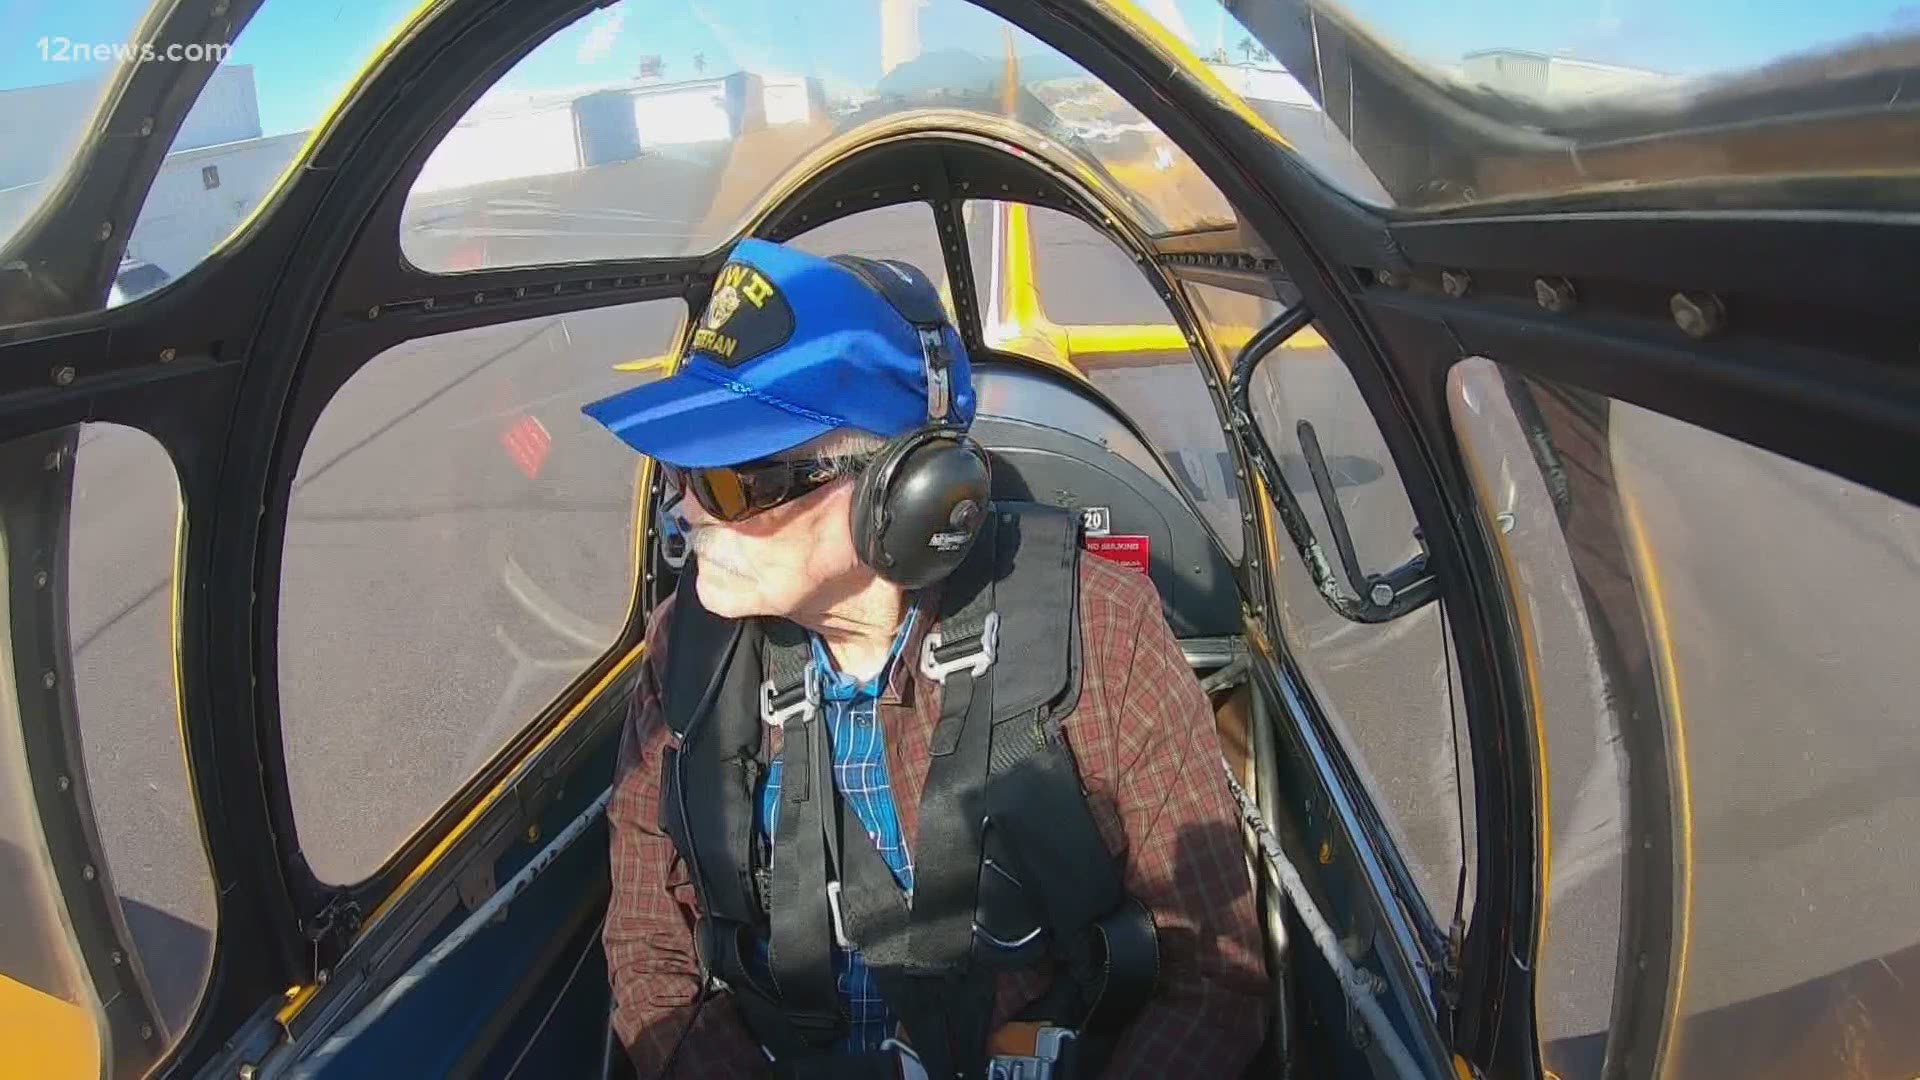 A local organization gave a WWII veteran a birthday celebration he won’t soon forget, flying him high above the Valley in an aircraft that helped save the world.